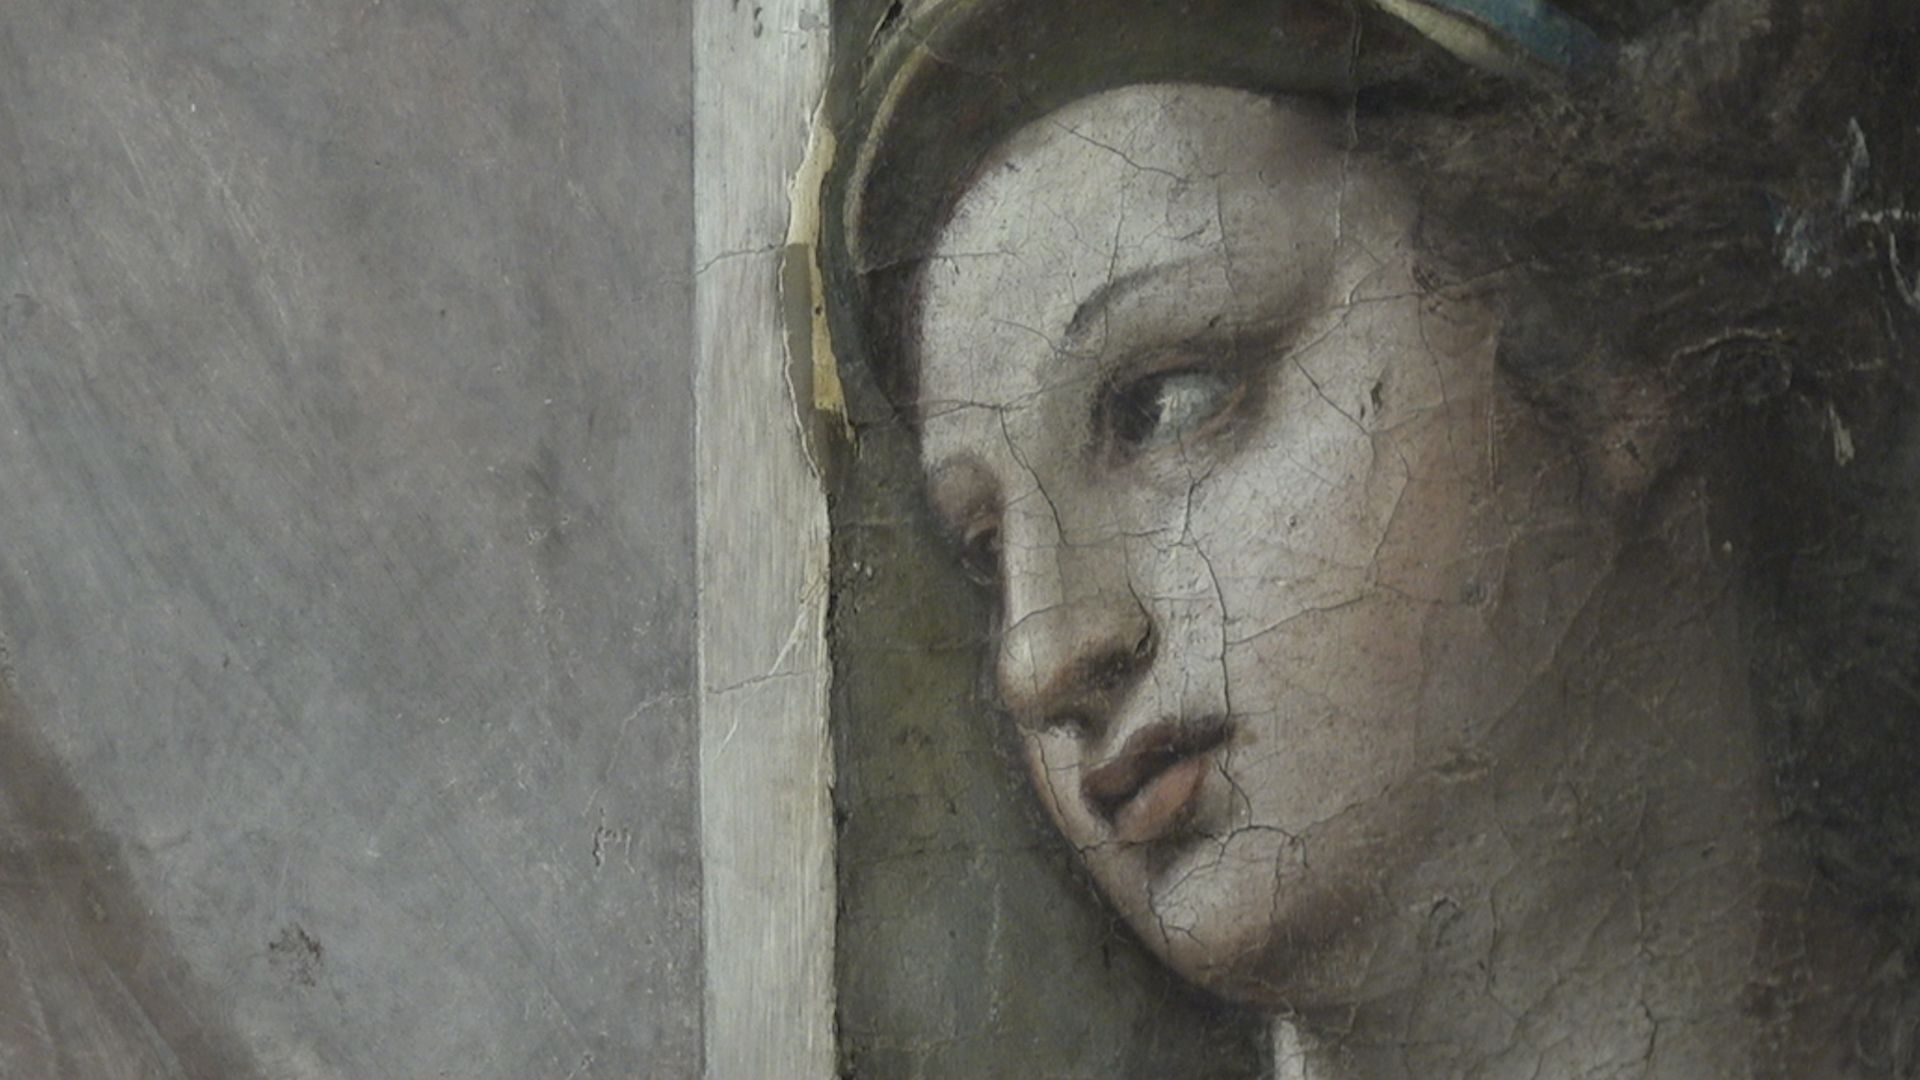 Two Raphael paintings unearthed after 500 years